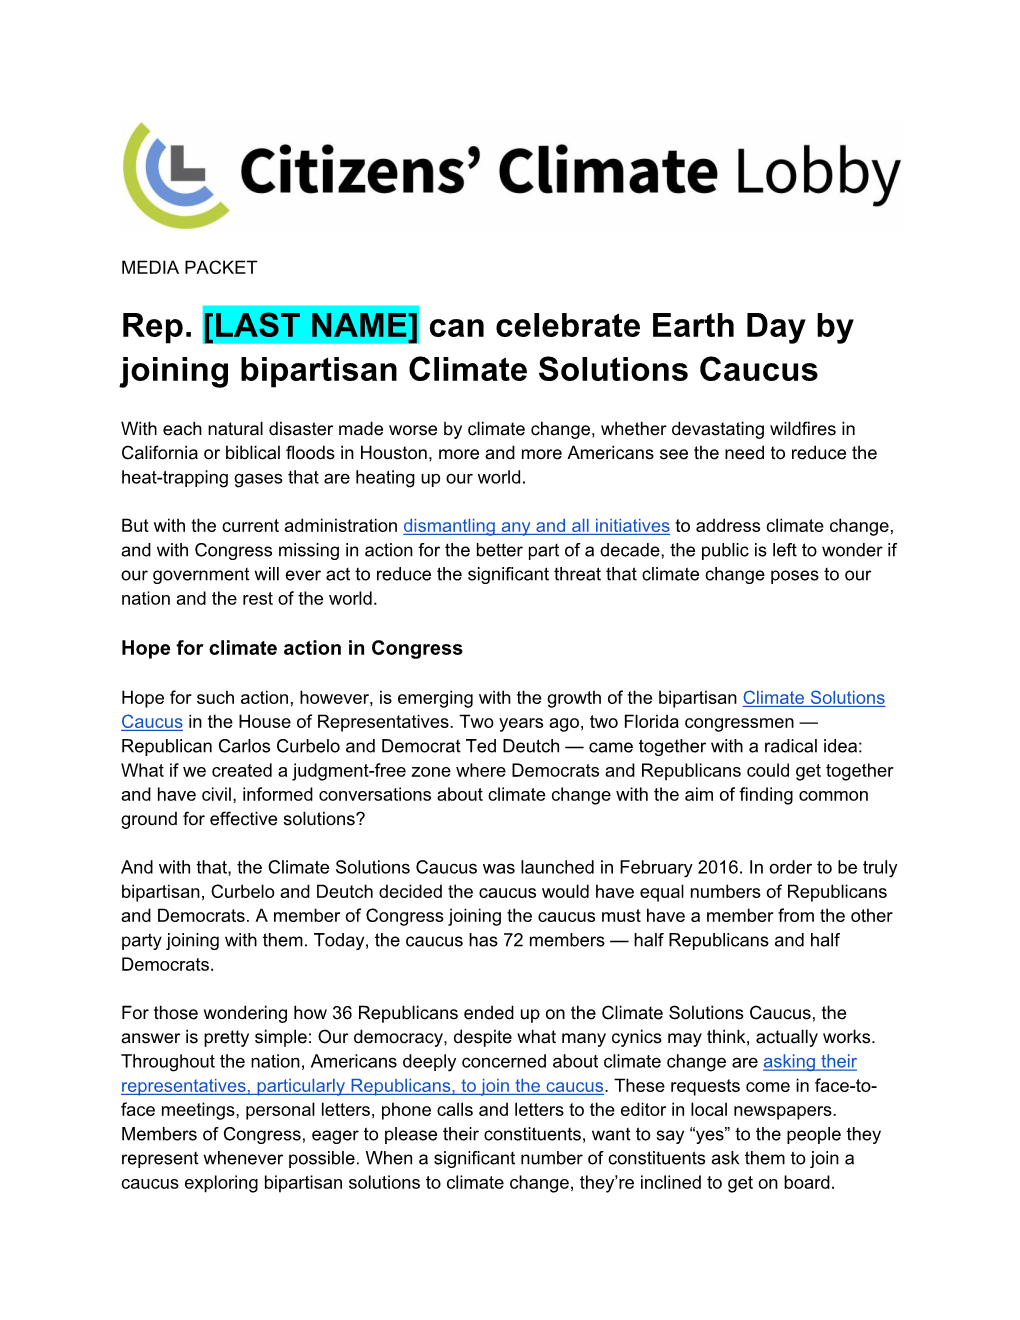 Can Celebrate Earth Day by Joining Bipartisan Climate Solutions Caucus